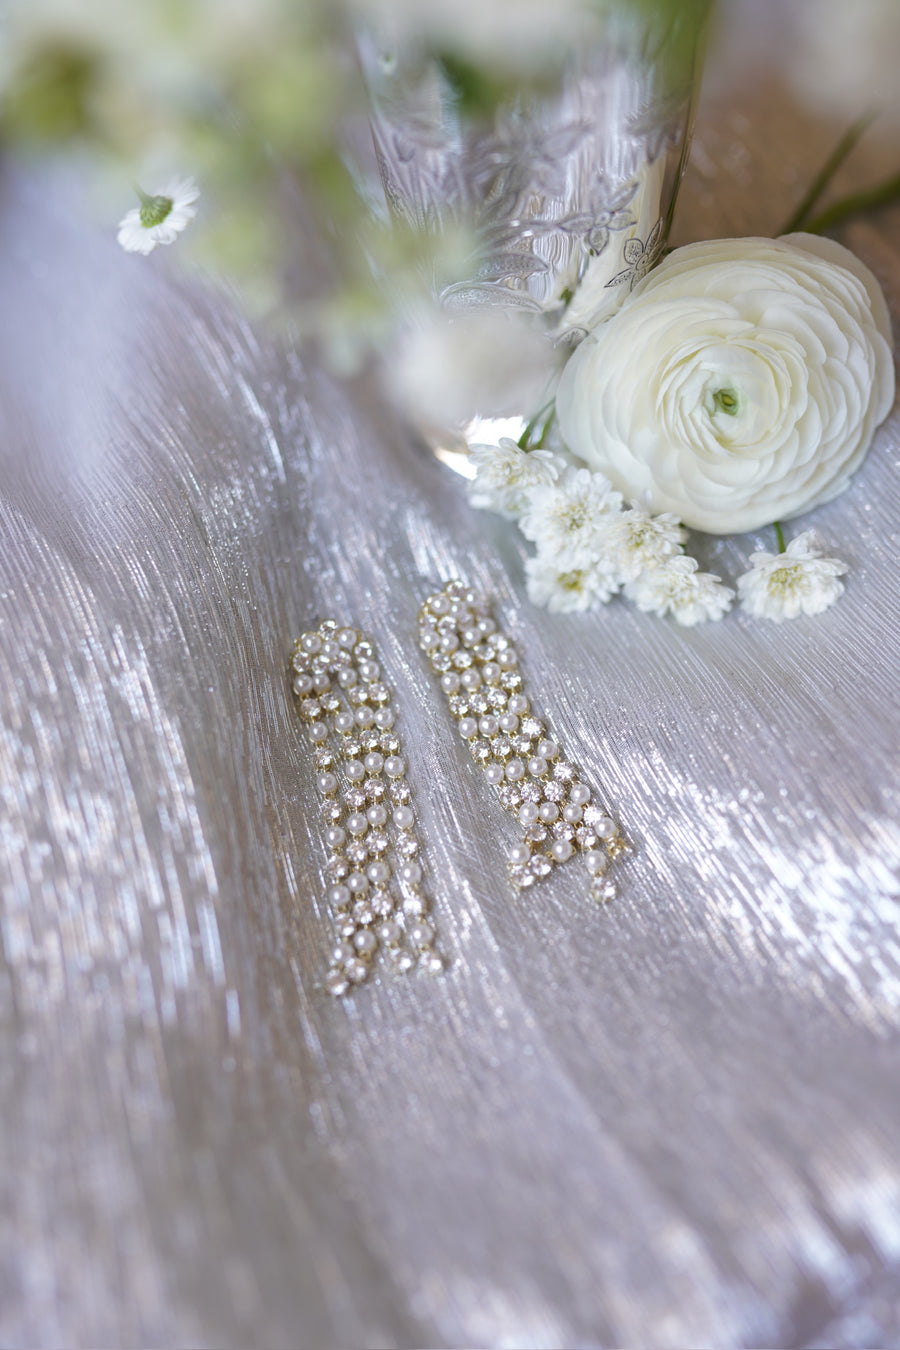 Pearly & Embellished Tassels